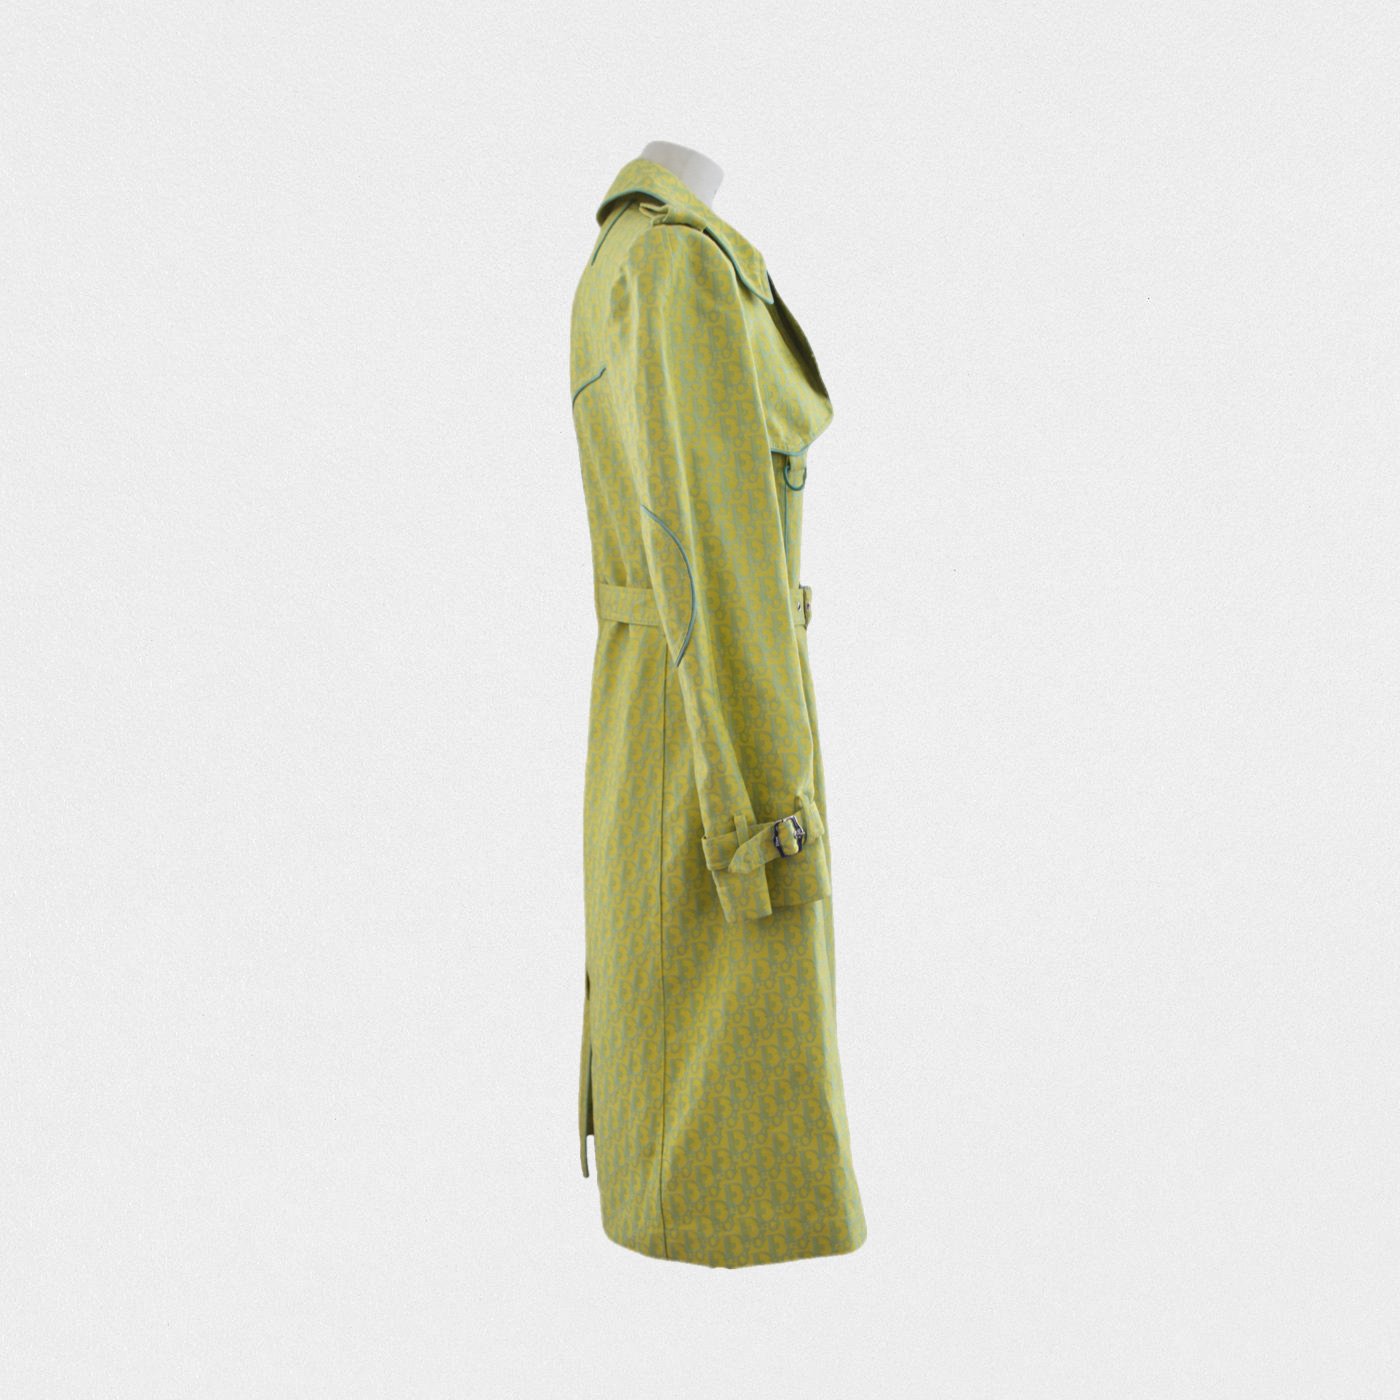 Lysis vintage "Dior trench - M - ""Rasta"" collection 2004 by John Galliano"